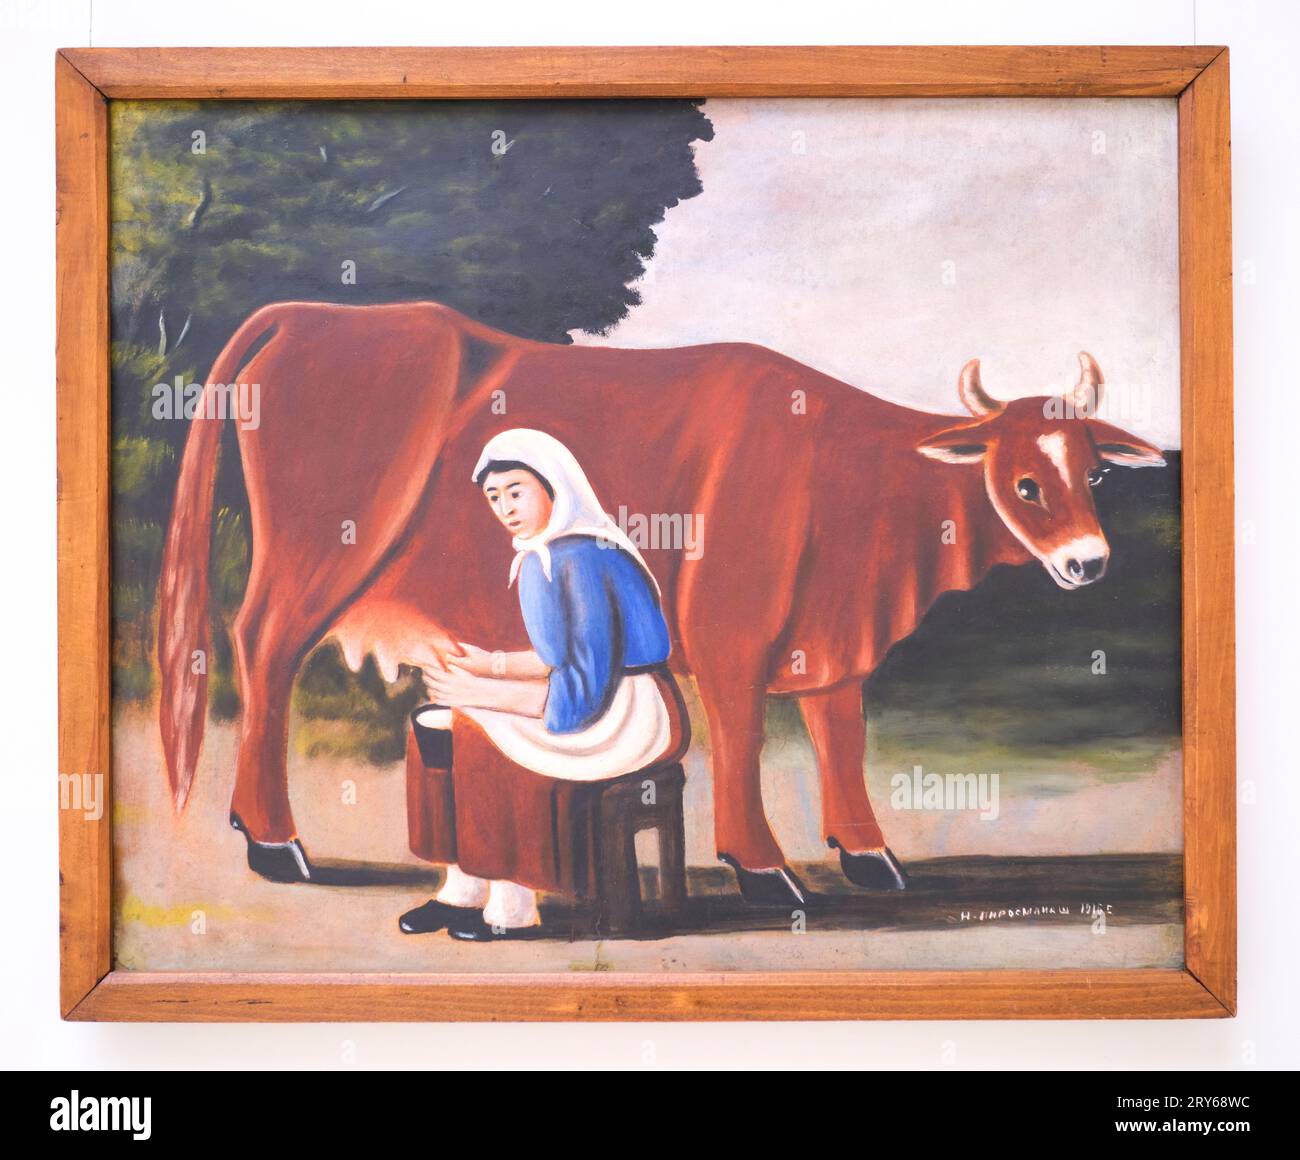 A classic, iconic painting by the artist, Niko Pirosmanashvili, titled, Woman Milking Cow. In Tbilisi, Georgia, Europe. Stock Photo